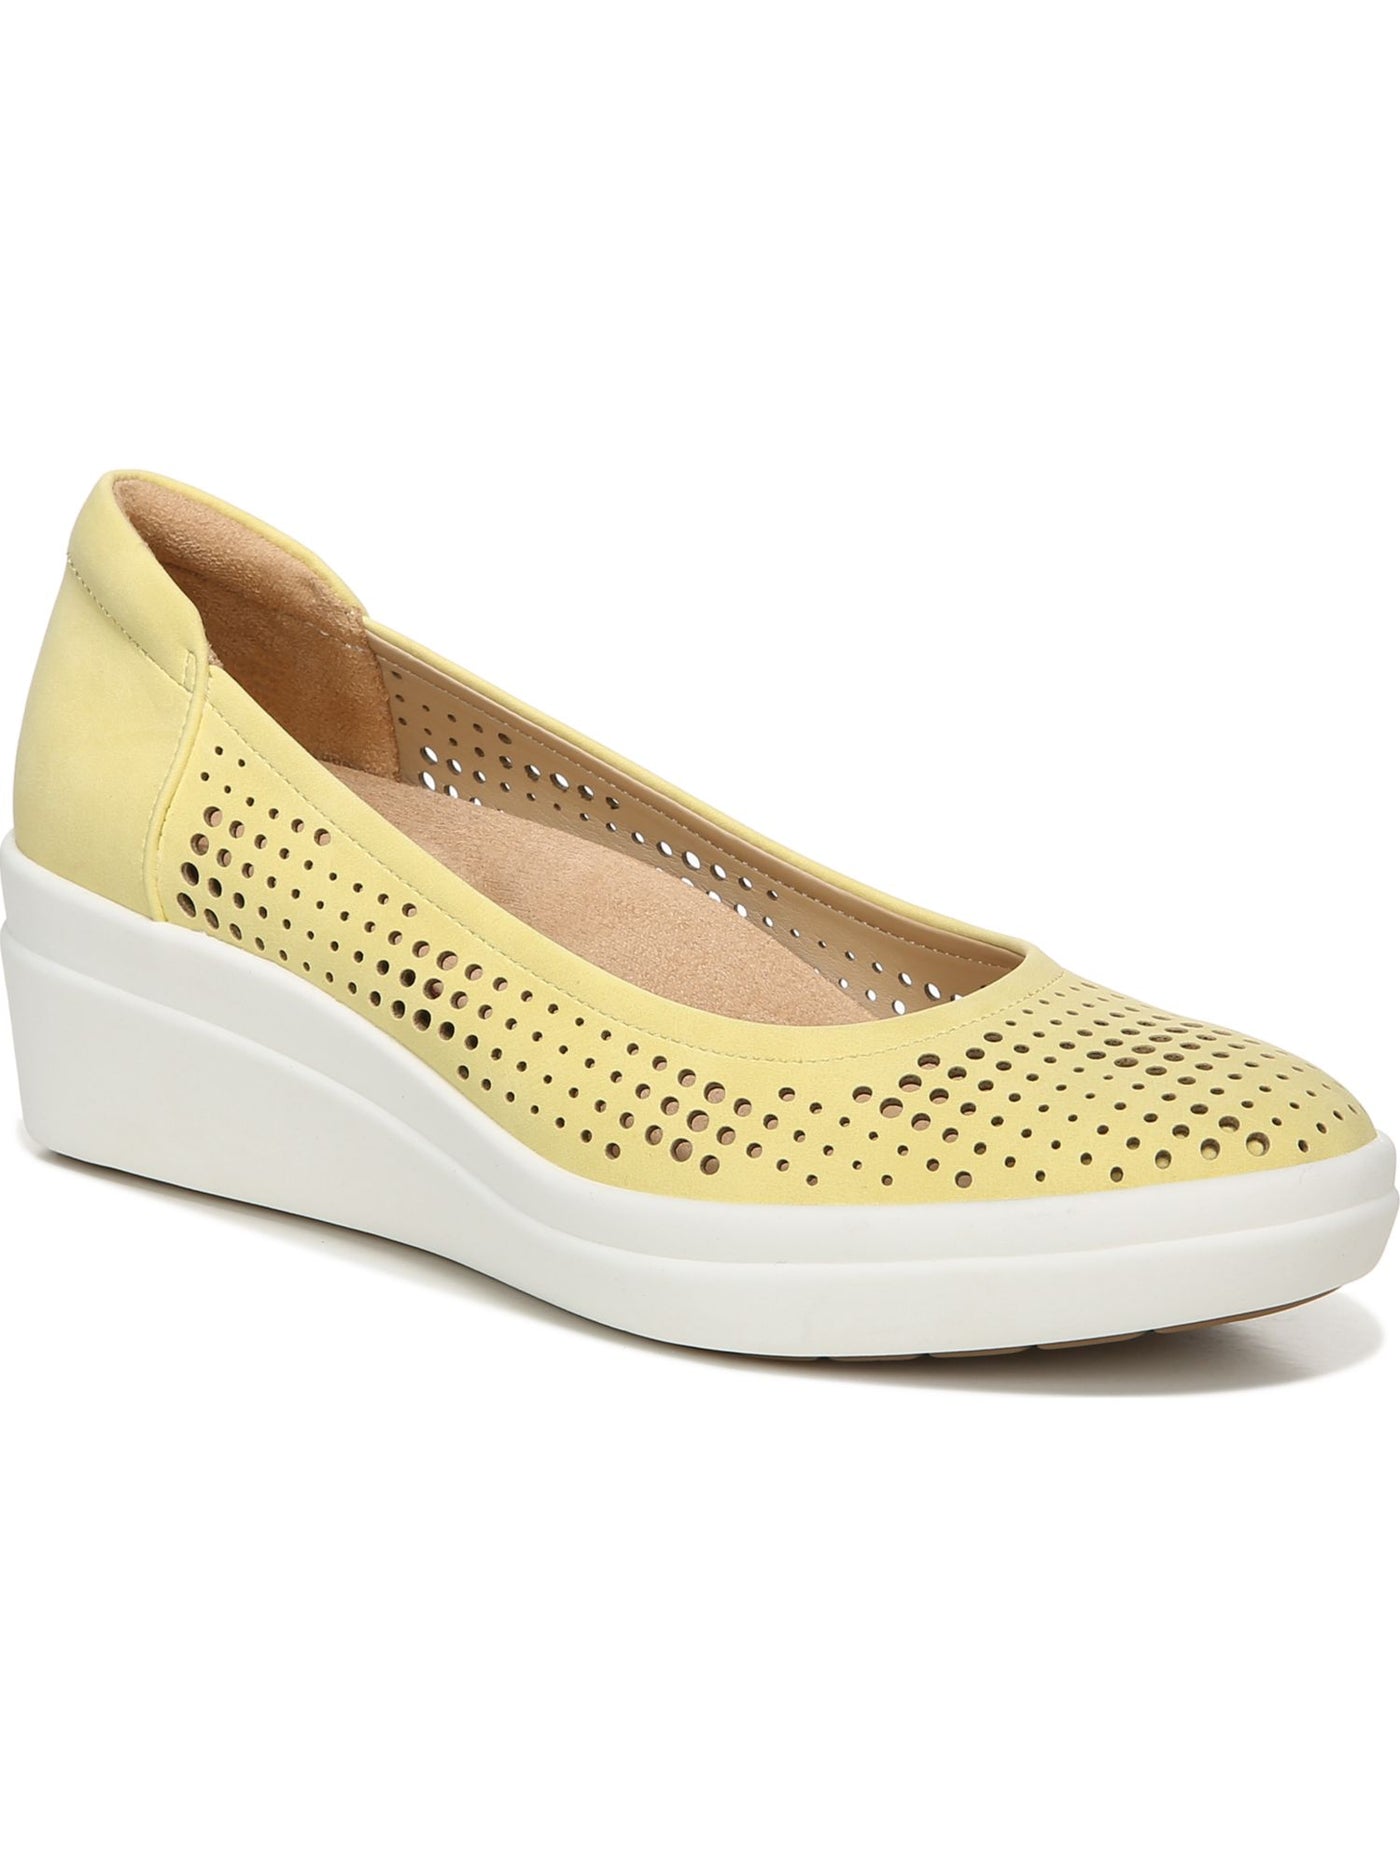 NATURALIZER Womens Yellow 1" Platform Perforated Cushioned Sam Almond Toe Wedge Slide Flats Shoes 7 W